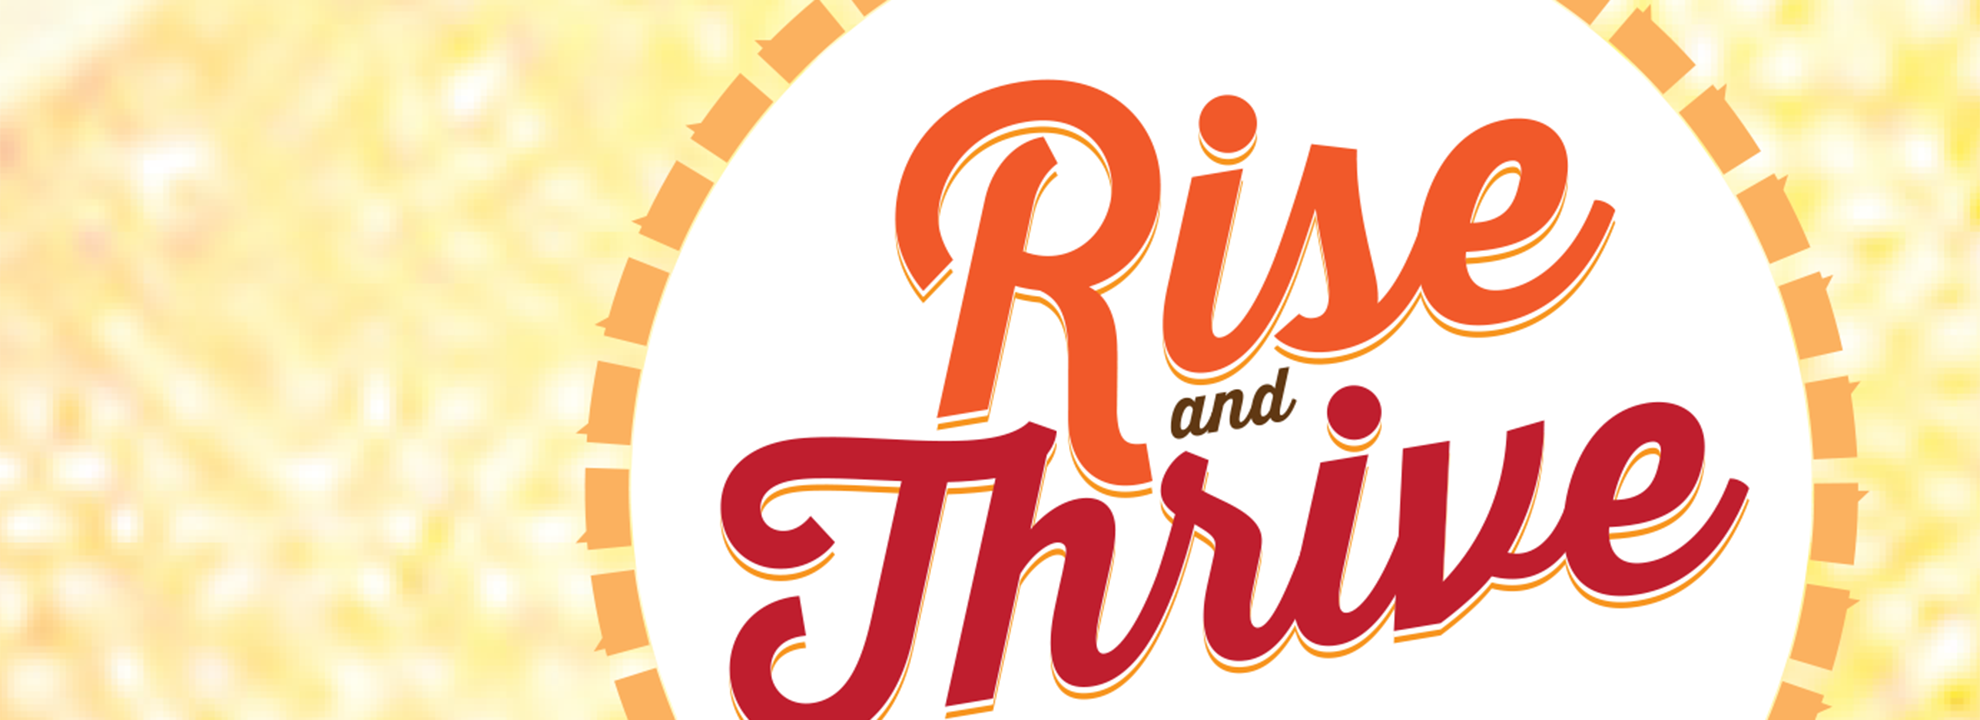 Rise and Thrive 2013